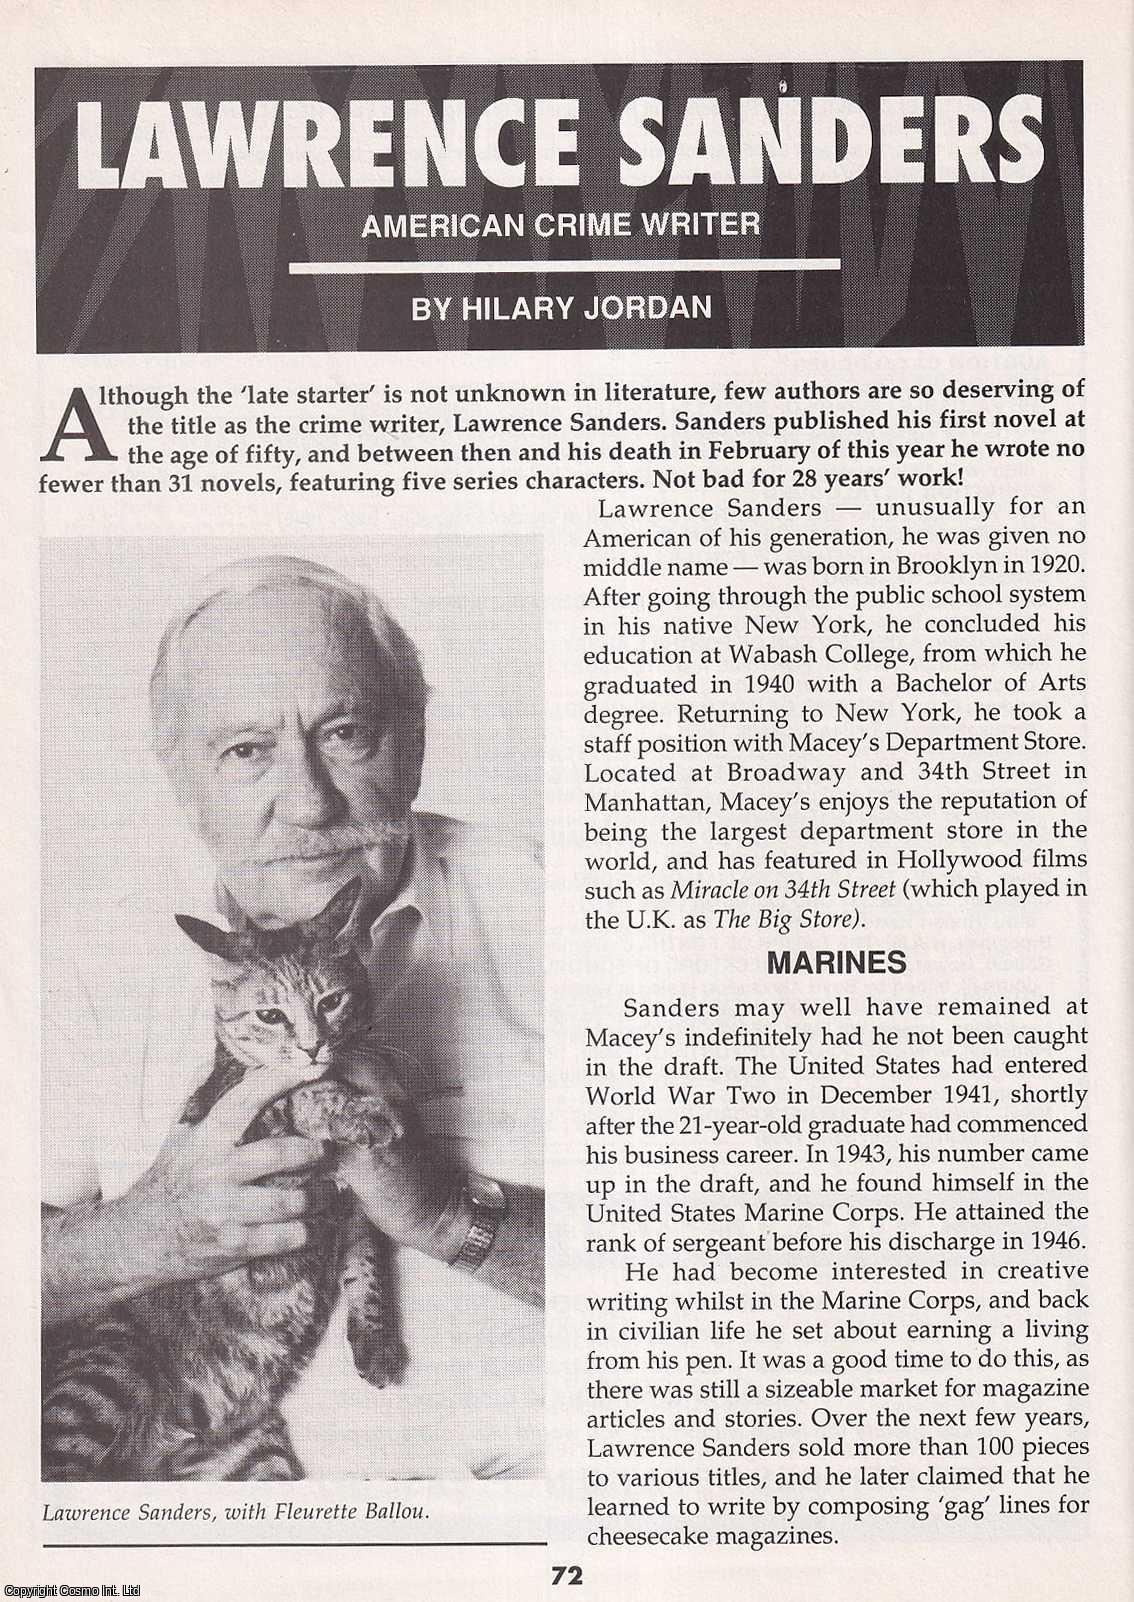 Hilary Jordan - Lawrence Sanders. American Crime Writer. This is an original article separated from an issue of The Book & Magazine Collector publication.